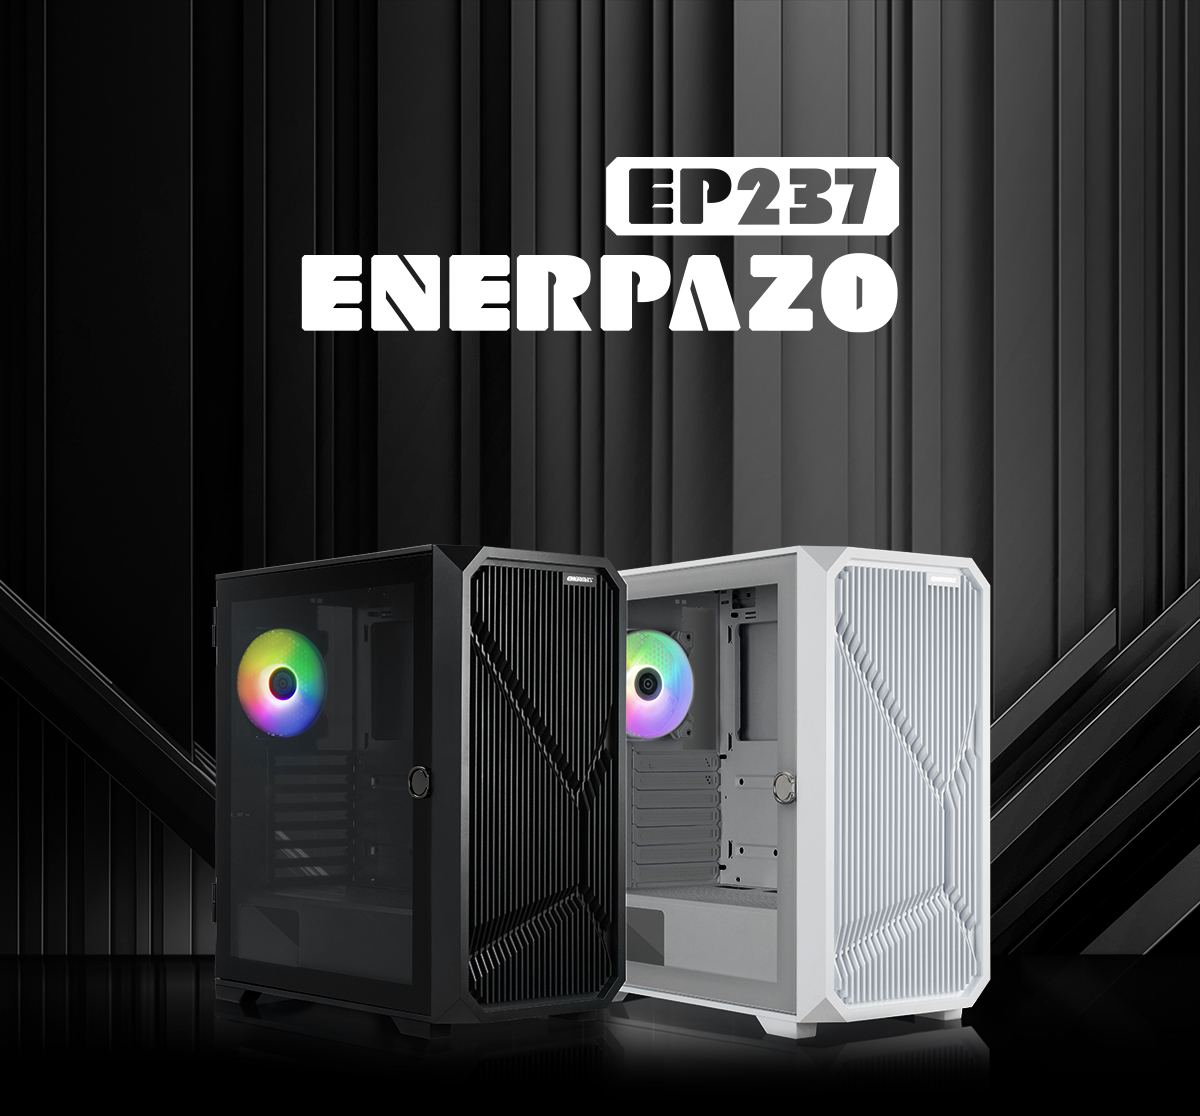 EP237-02-pc-case system